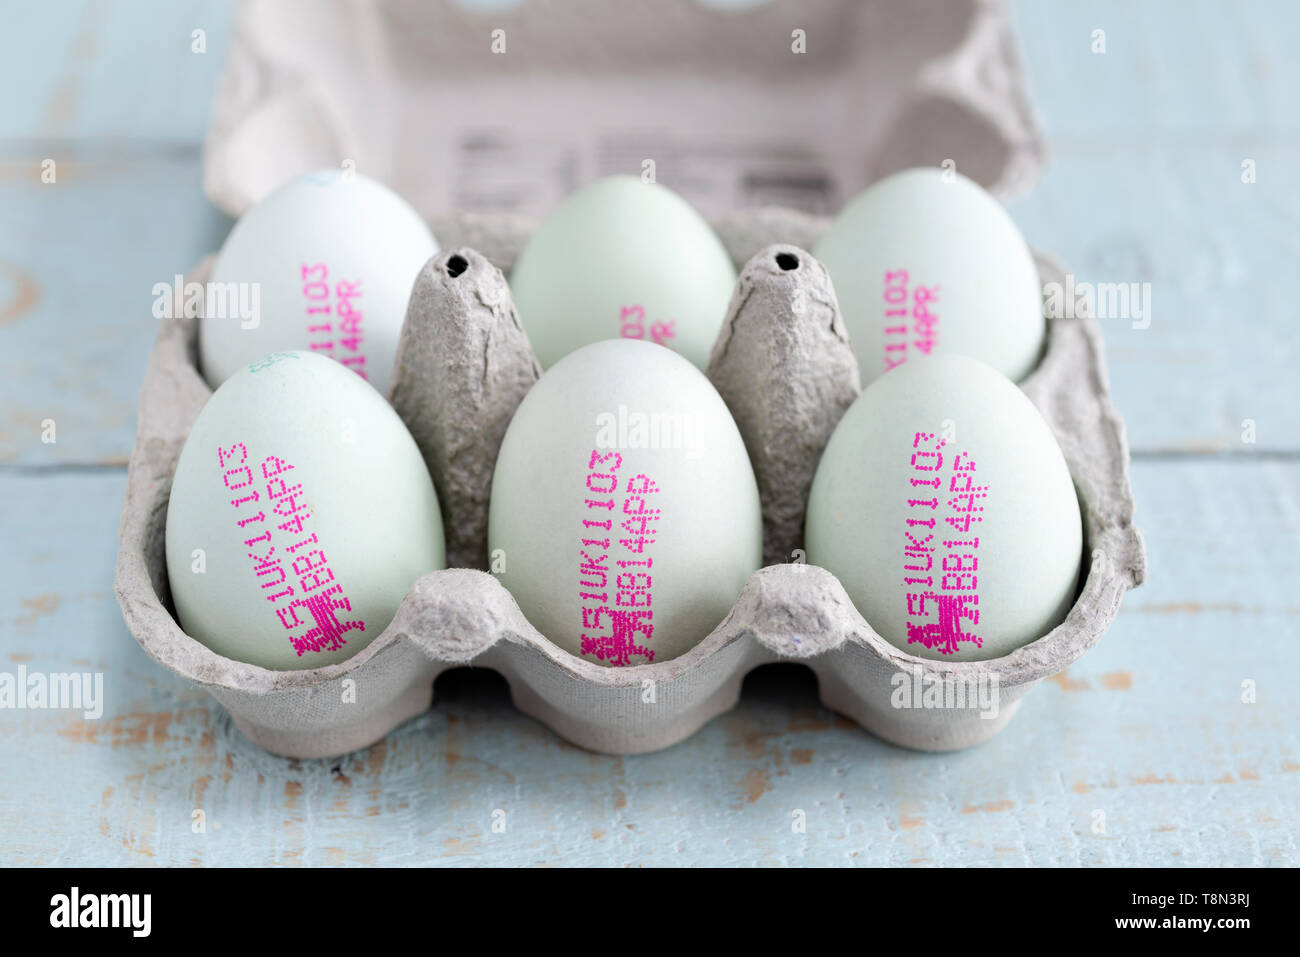 'British Blue' eggs, showing the British Lion Mark, a food safety standard. England, UK. Stock Photo